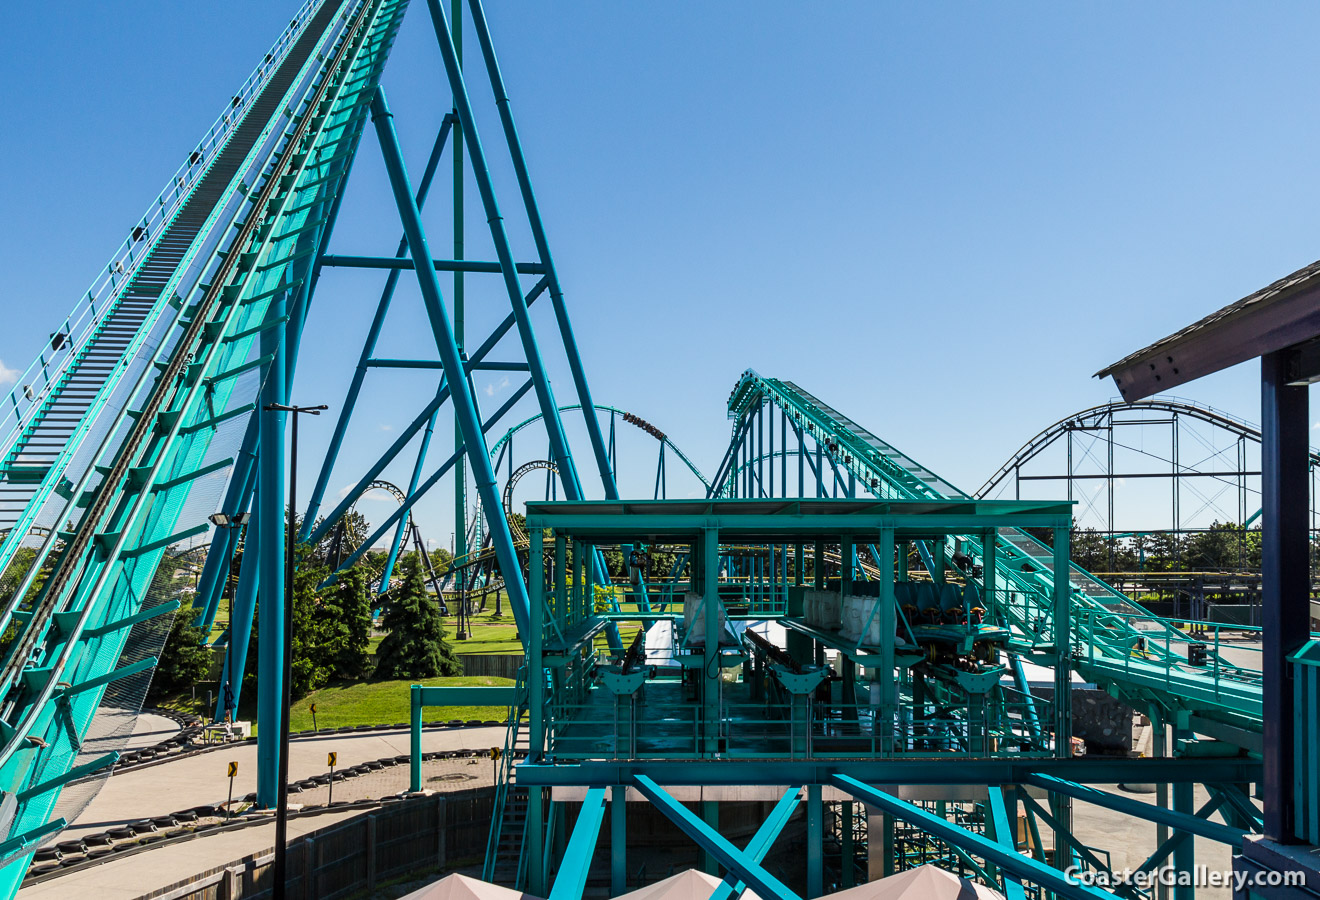 An overbanked turn and the maintenance shed on the Leviathan coaster